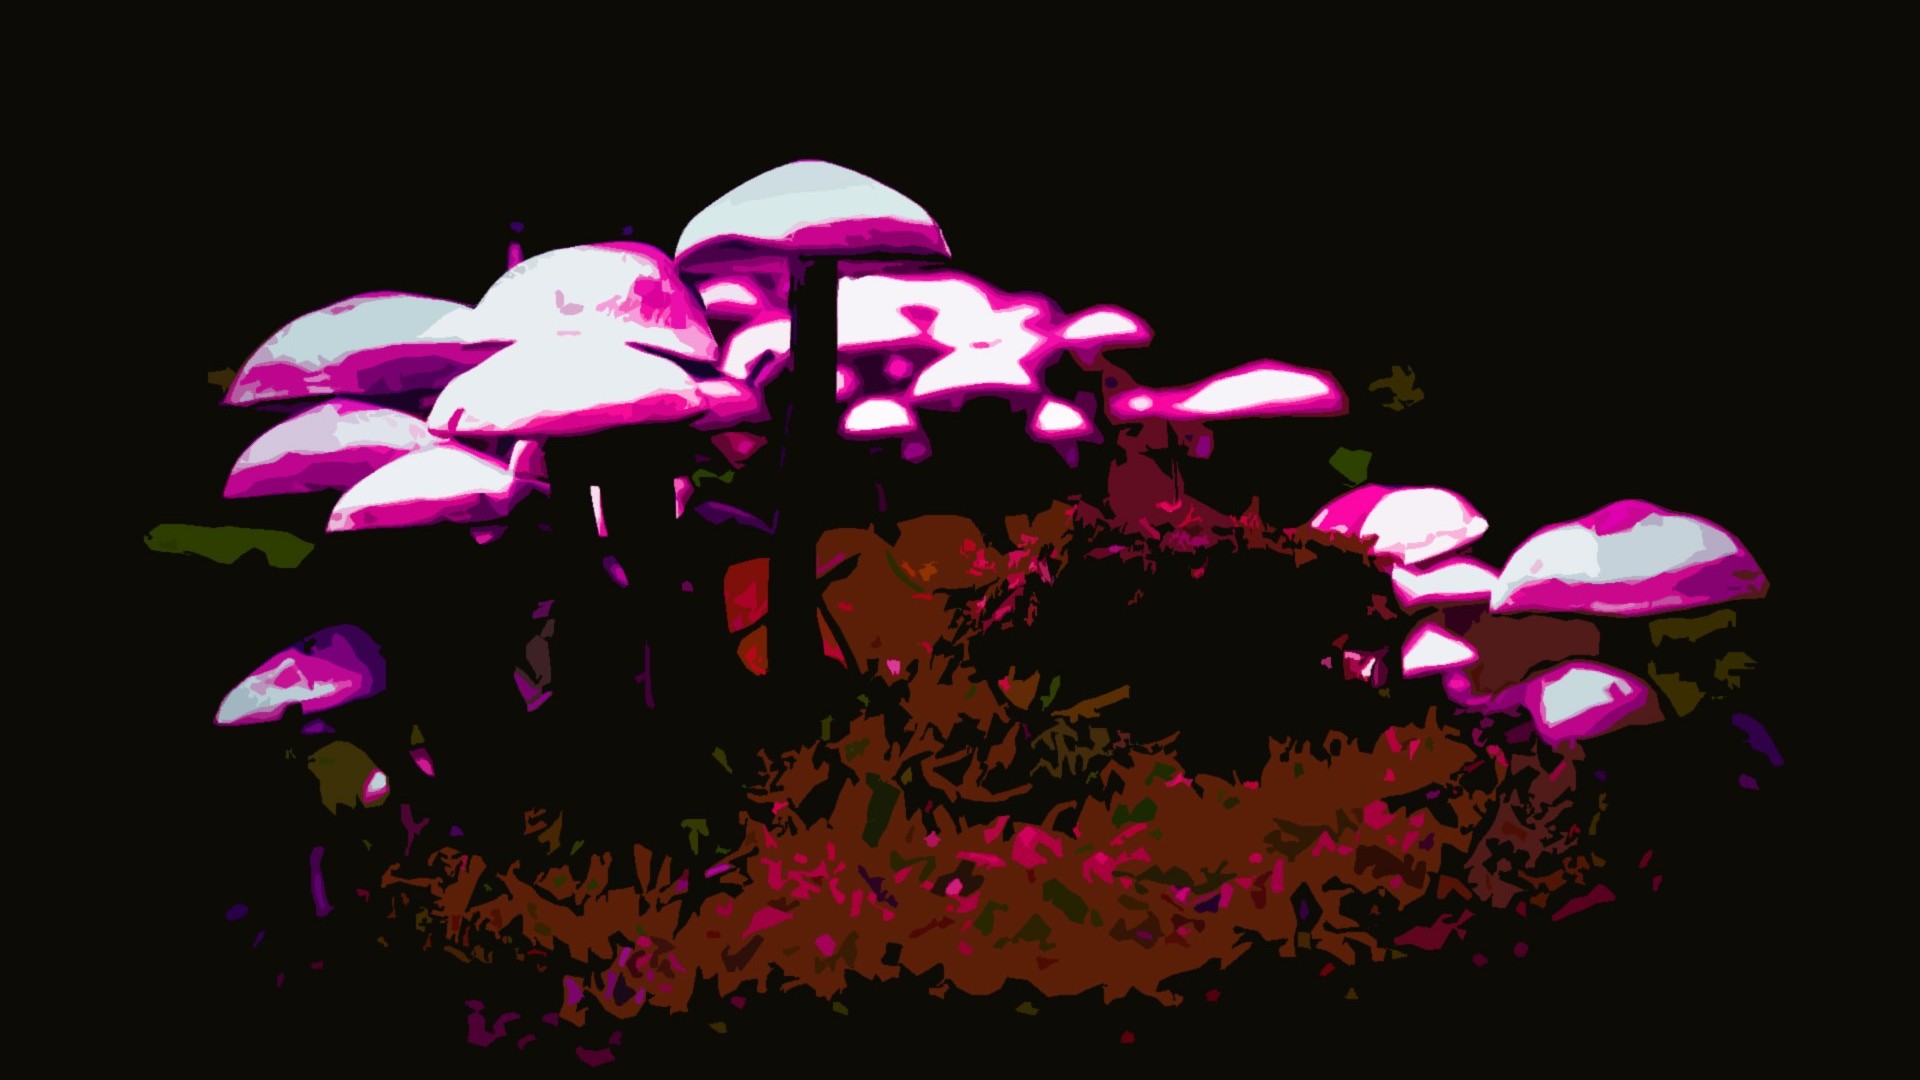 Trippy Shroom Wallpapers images